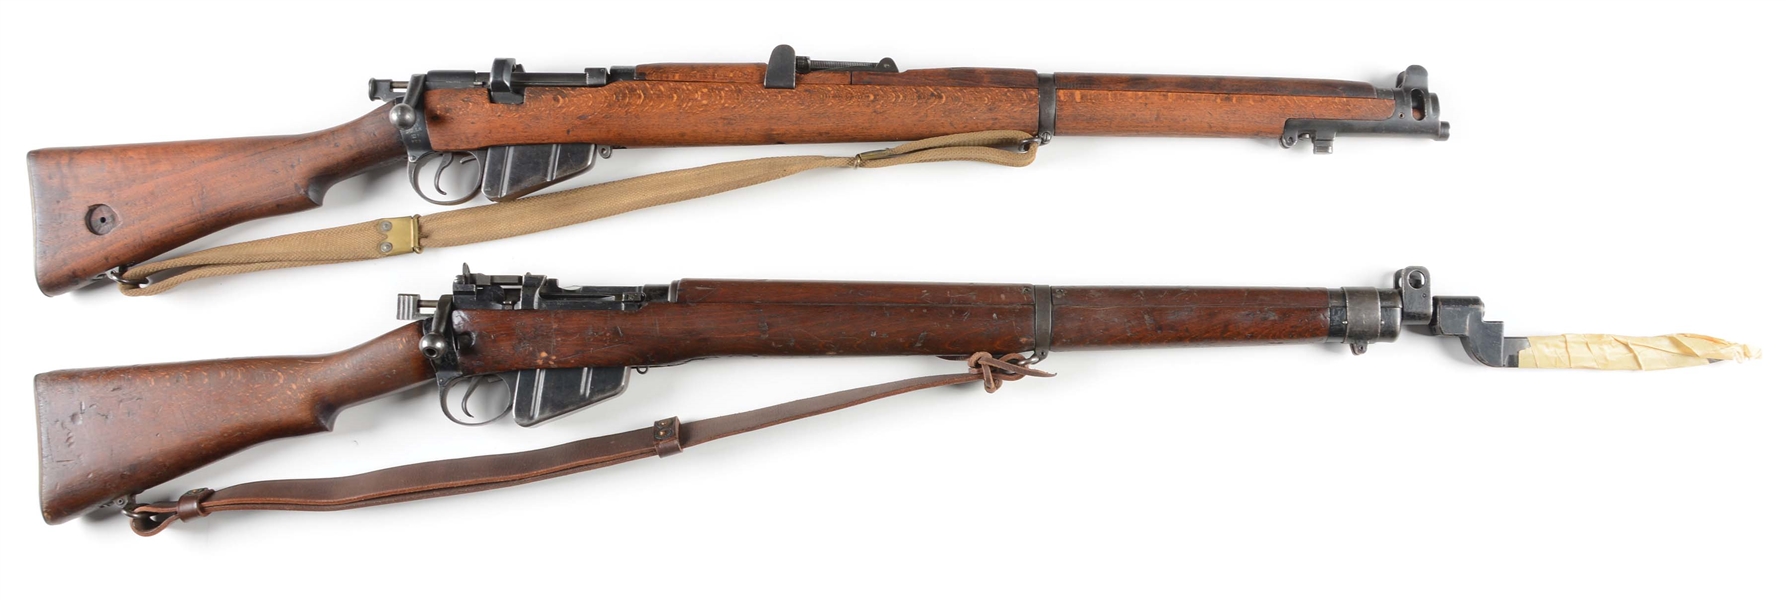 (C) LOT OF 2: ENFIELD SMLE MK III* & ENFIELD NO. 4 MK I BOLT ACTION RIFLE.